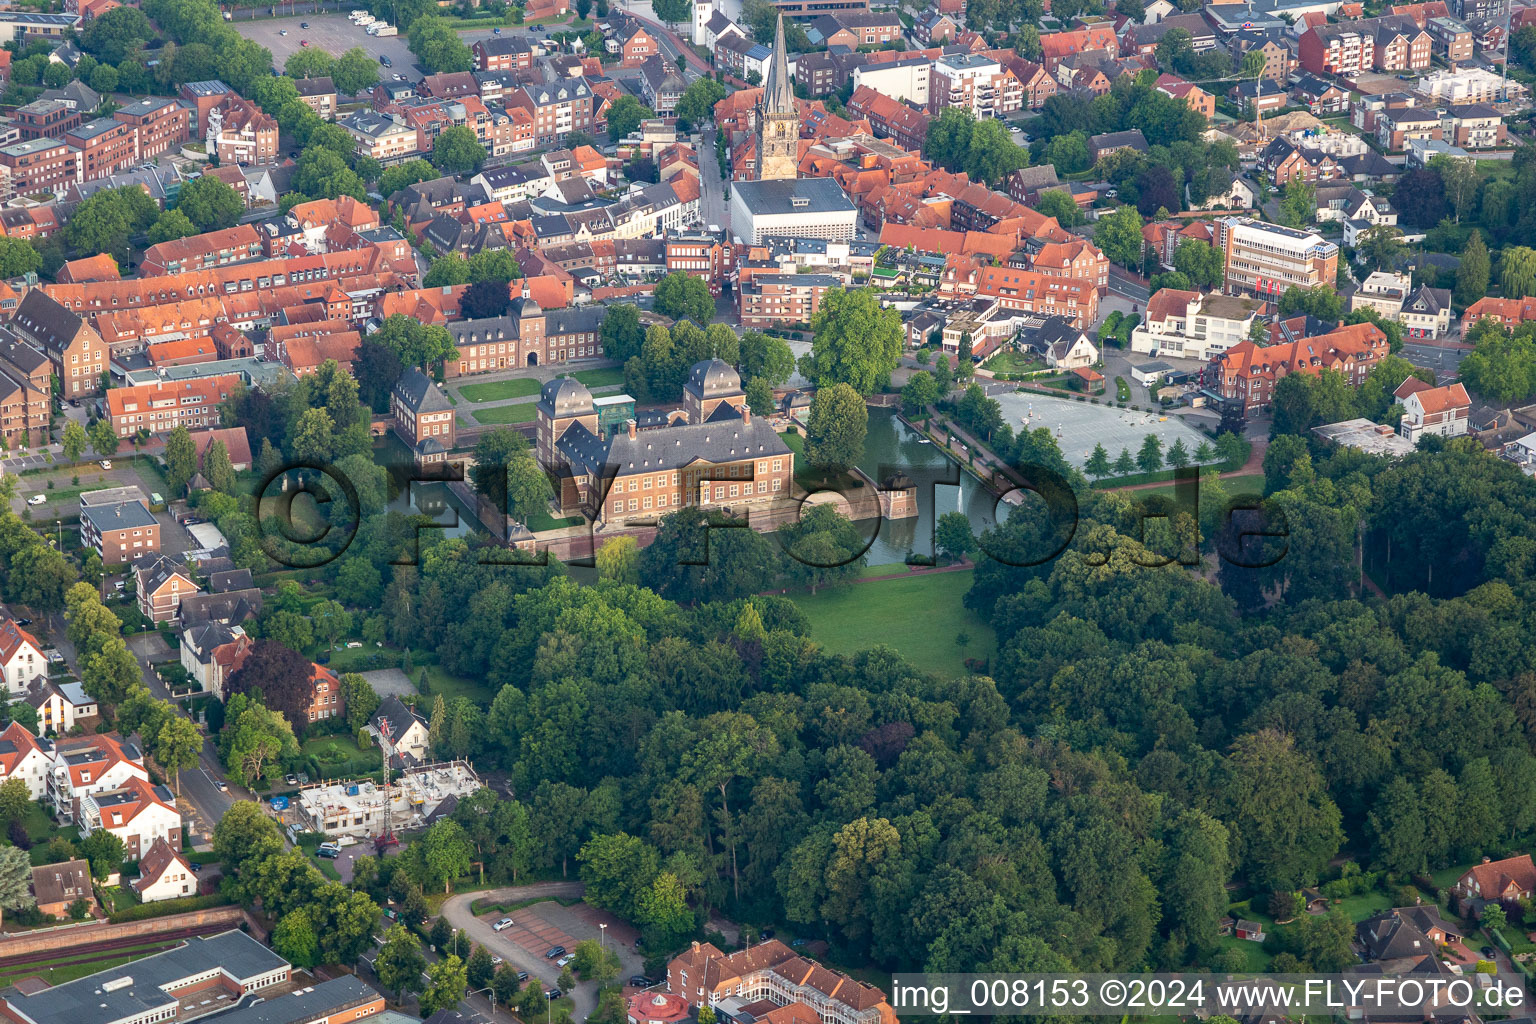 Aerial view of Moated castle and castle garden in Ahaus in the state North Rhine-Westphalia, Germany